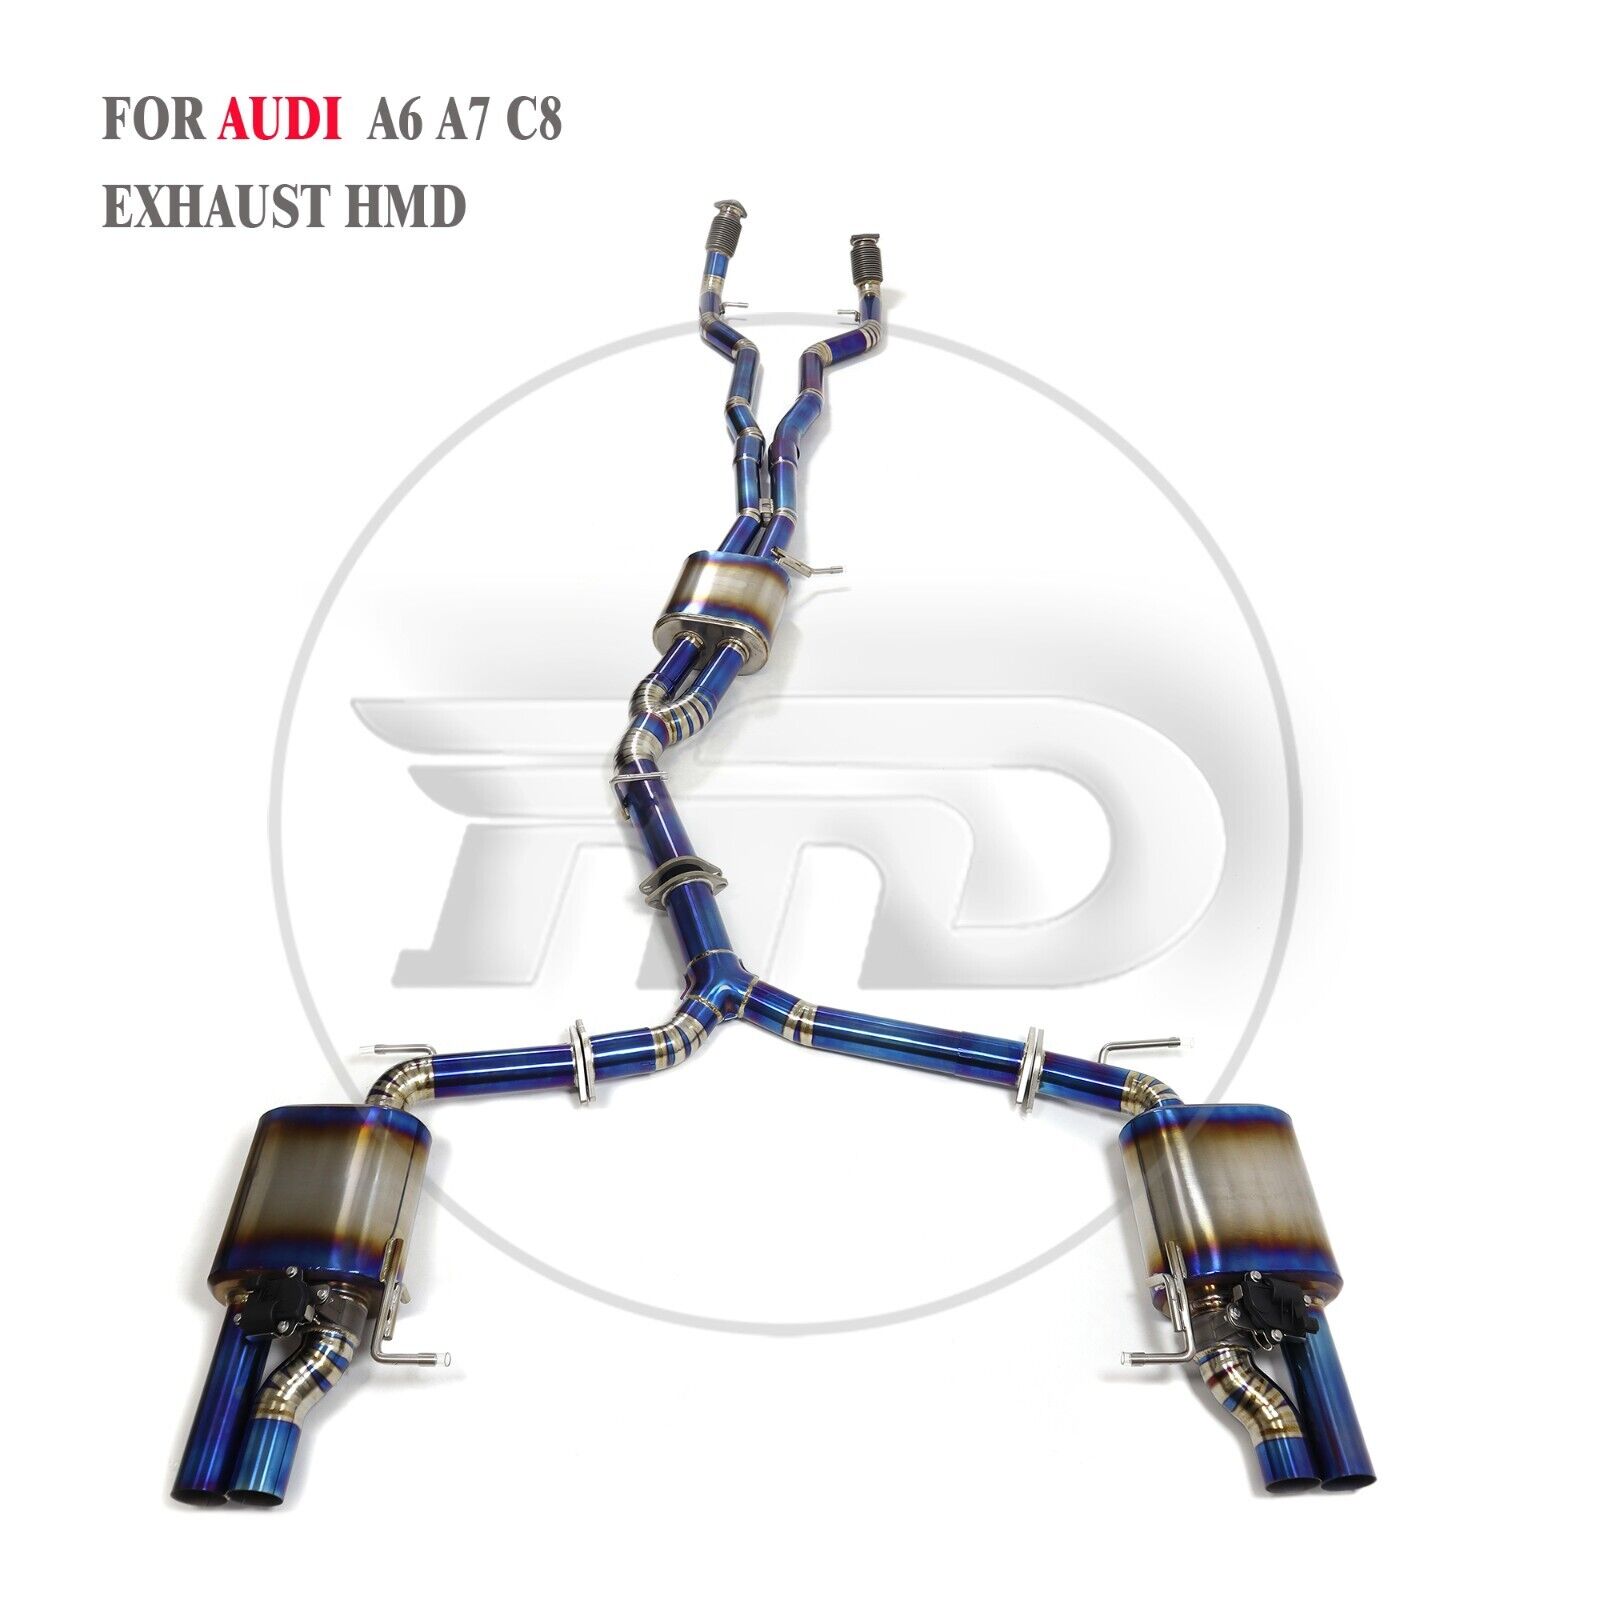 HMD Exhaust Pipe for Audi A6 A7 C8 3.0T fit for RS Style Diffuser RS6 RS7